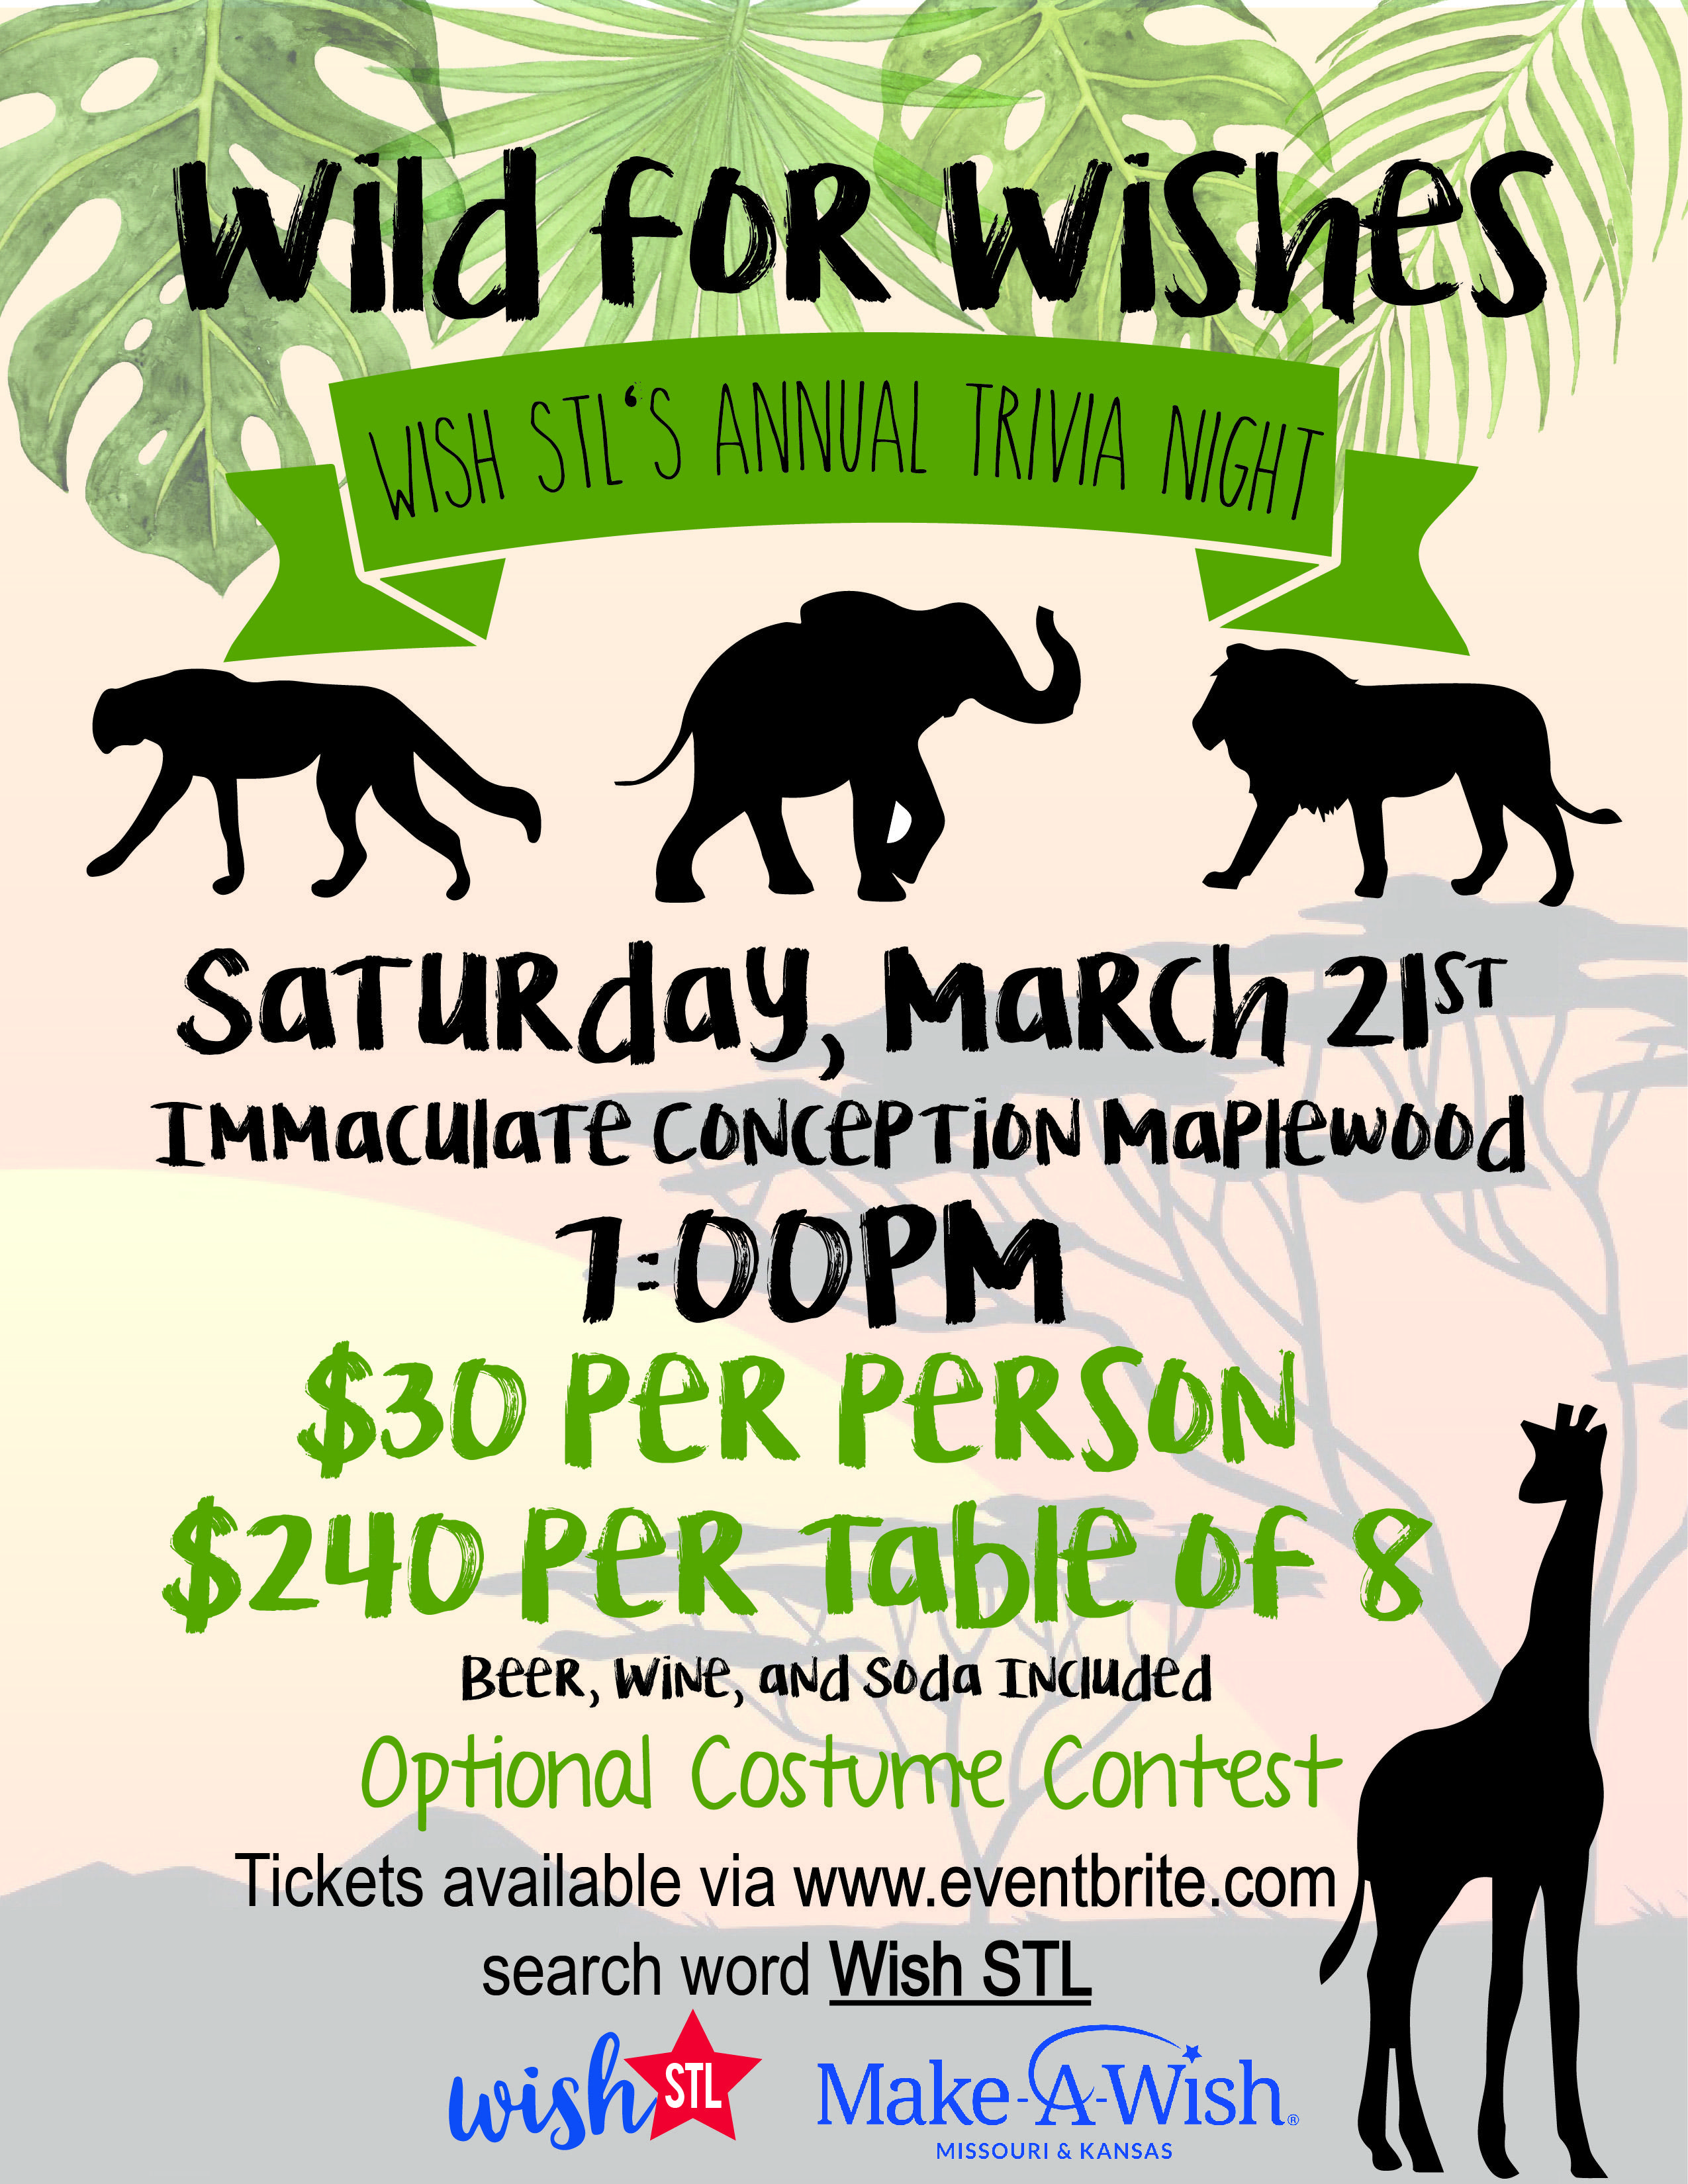 Wish STL presents “Wild For Wishes”